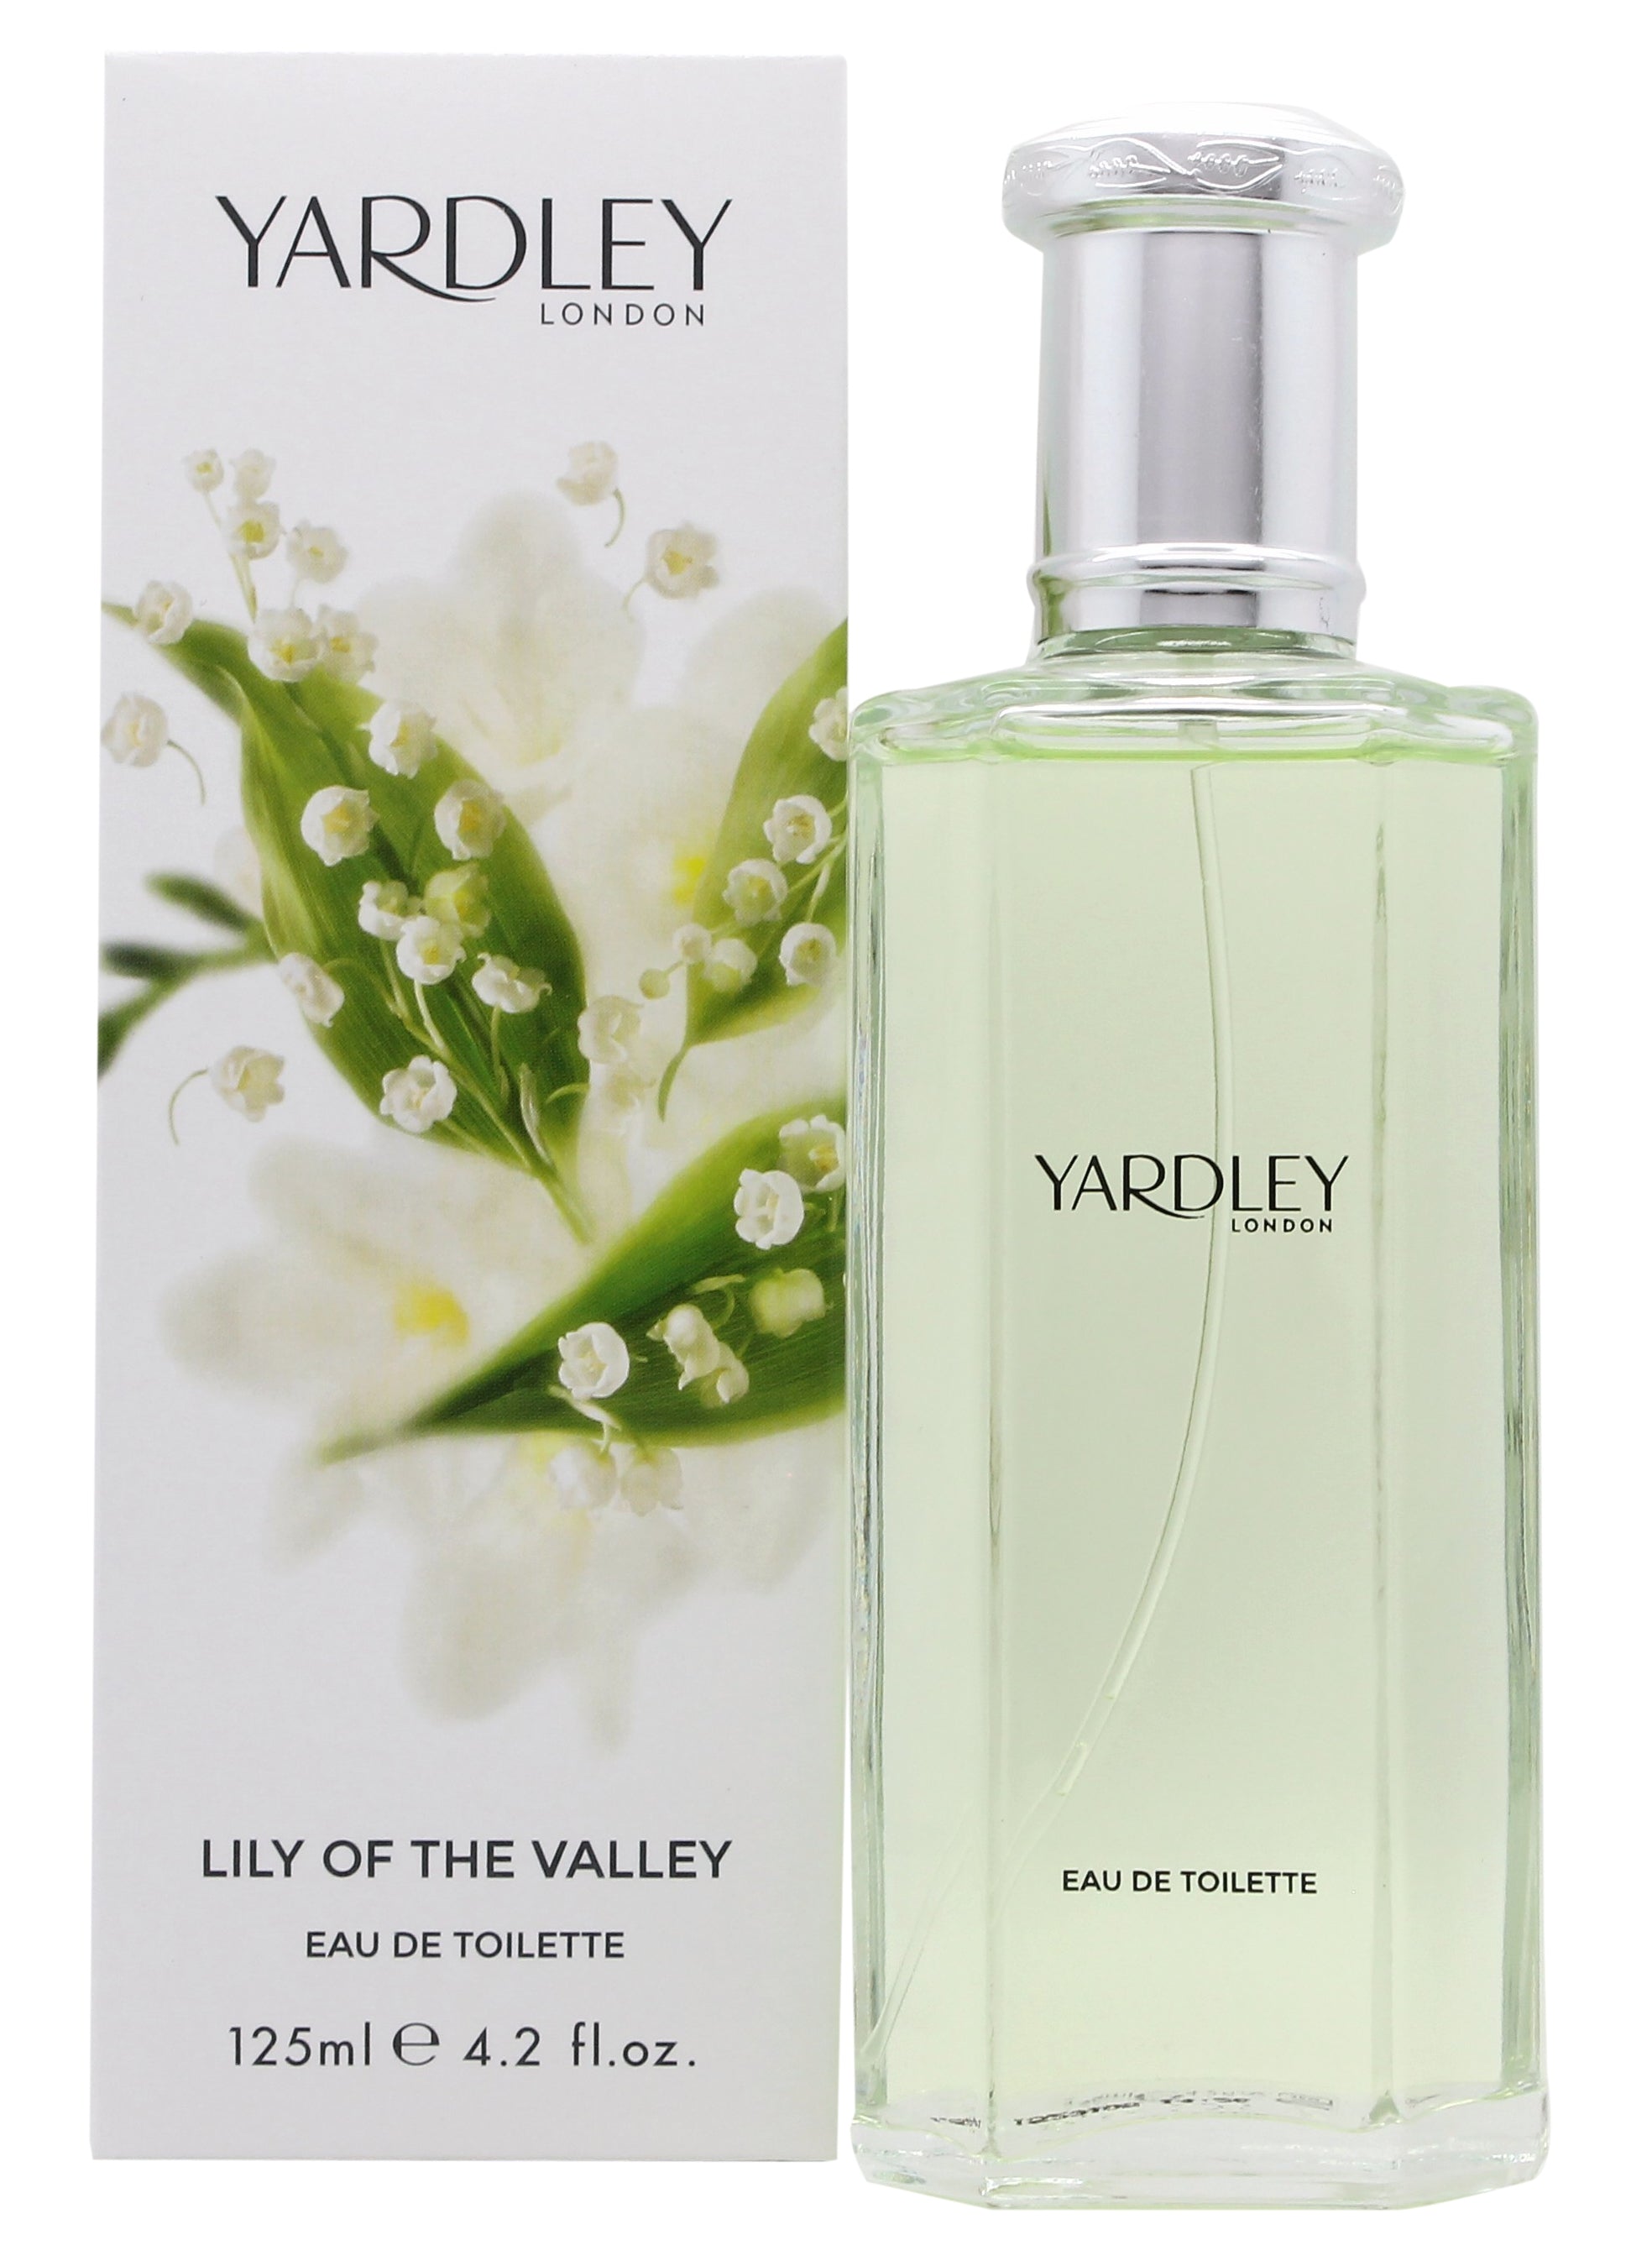 View Yardley Lily of the Valley Eau de Toilette 125ml Spray information